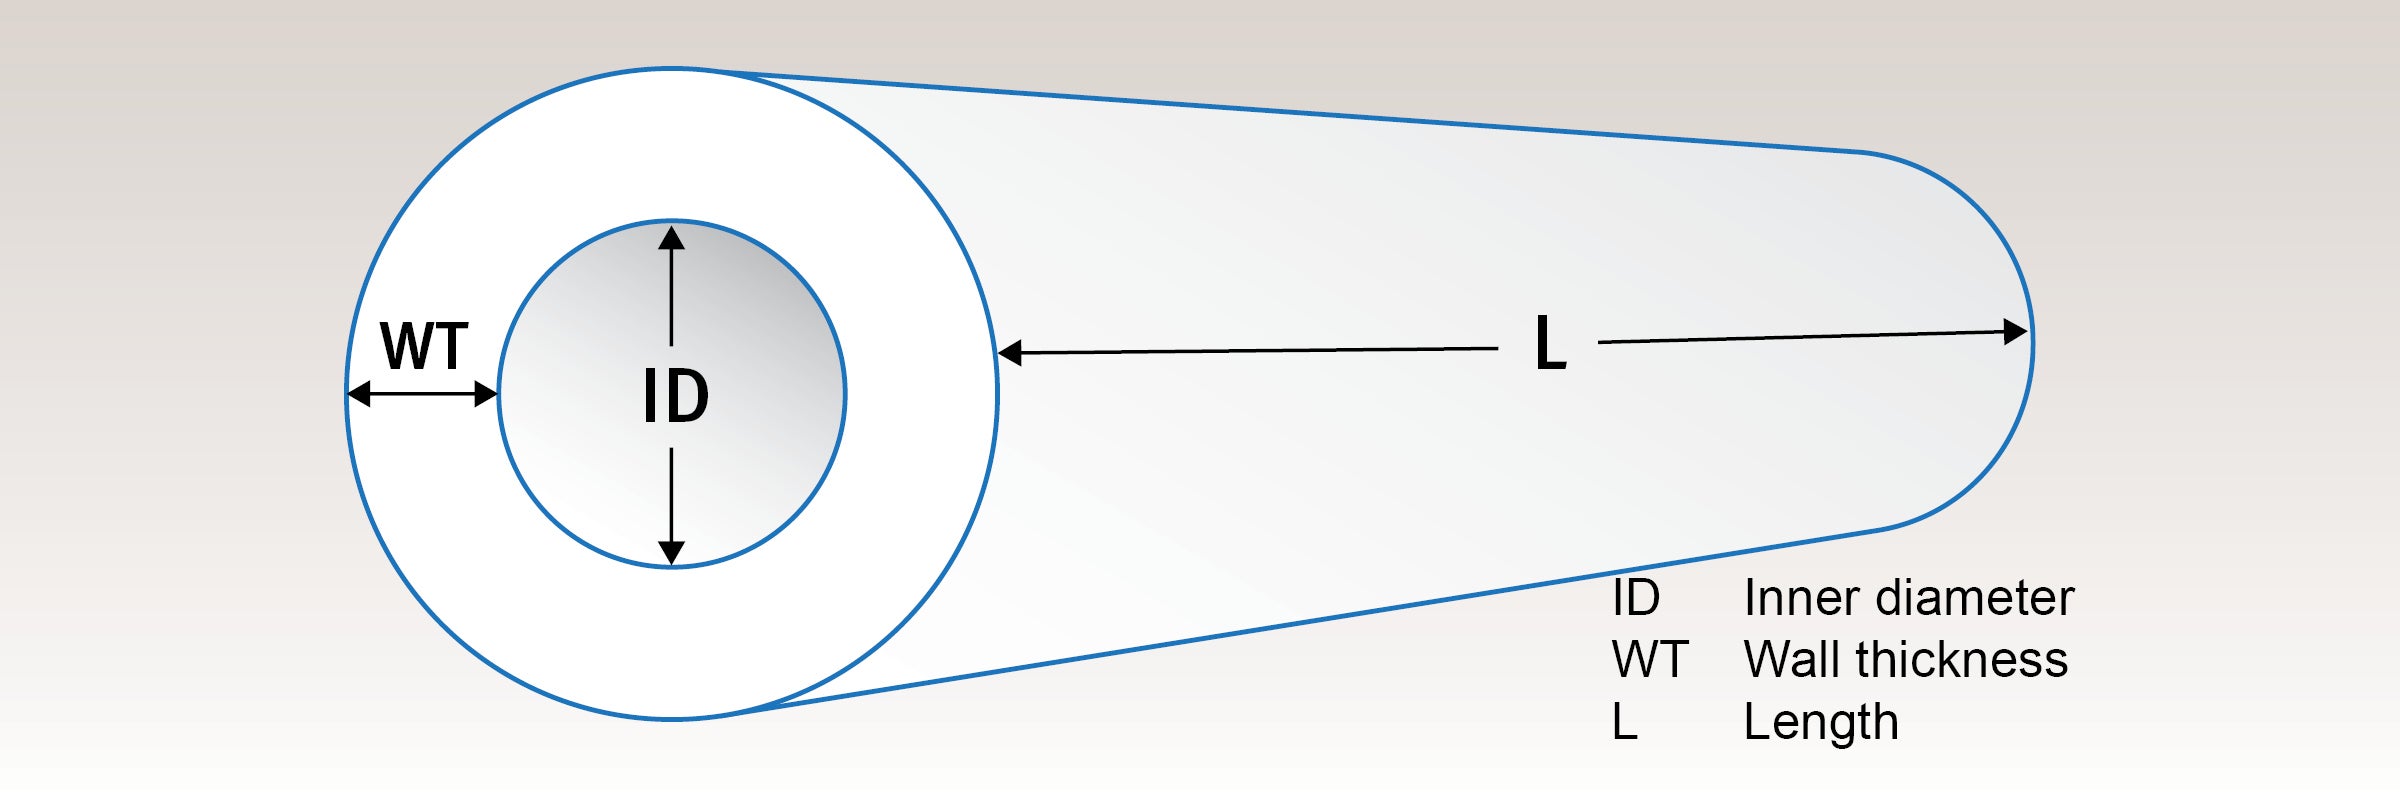 Illustration of tube showing inner diameter, wall thickness, and tube length.